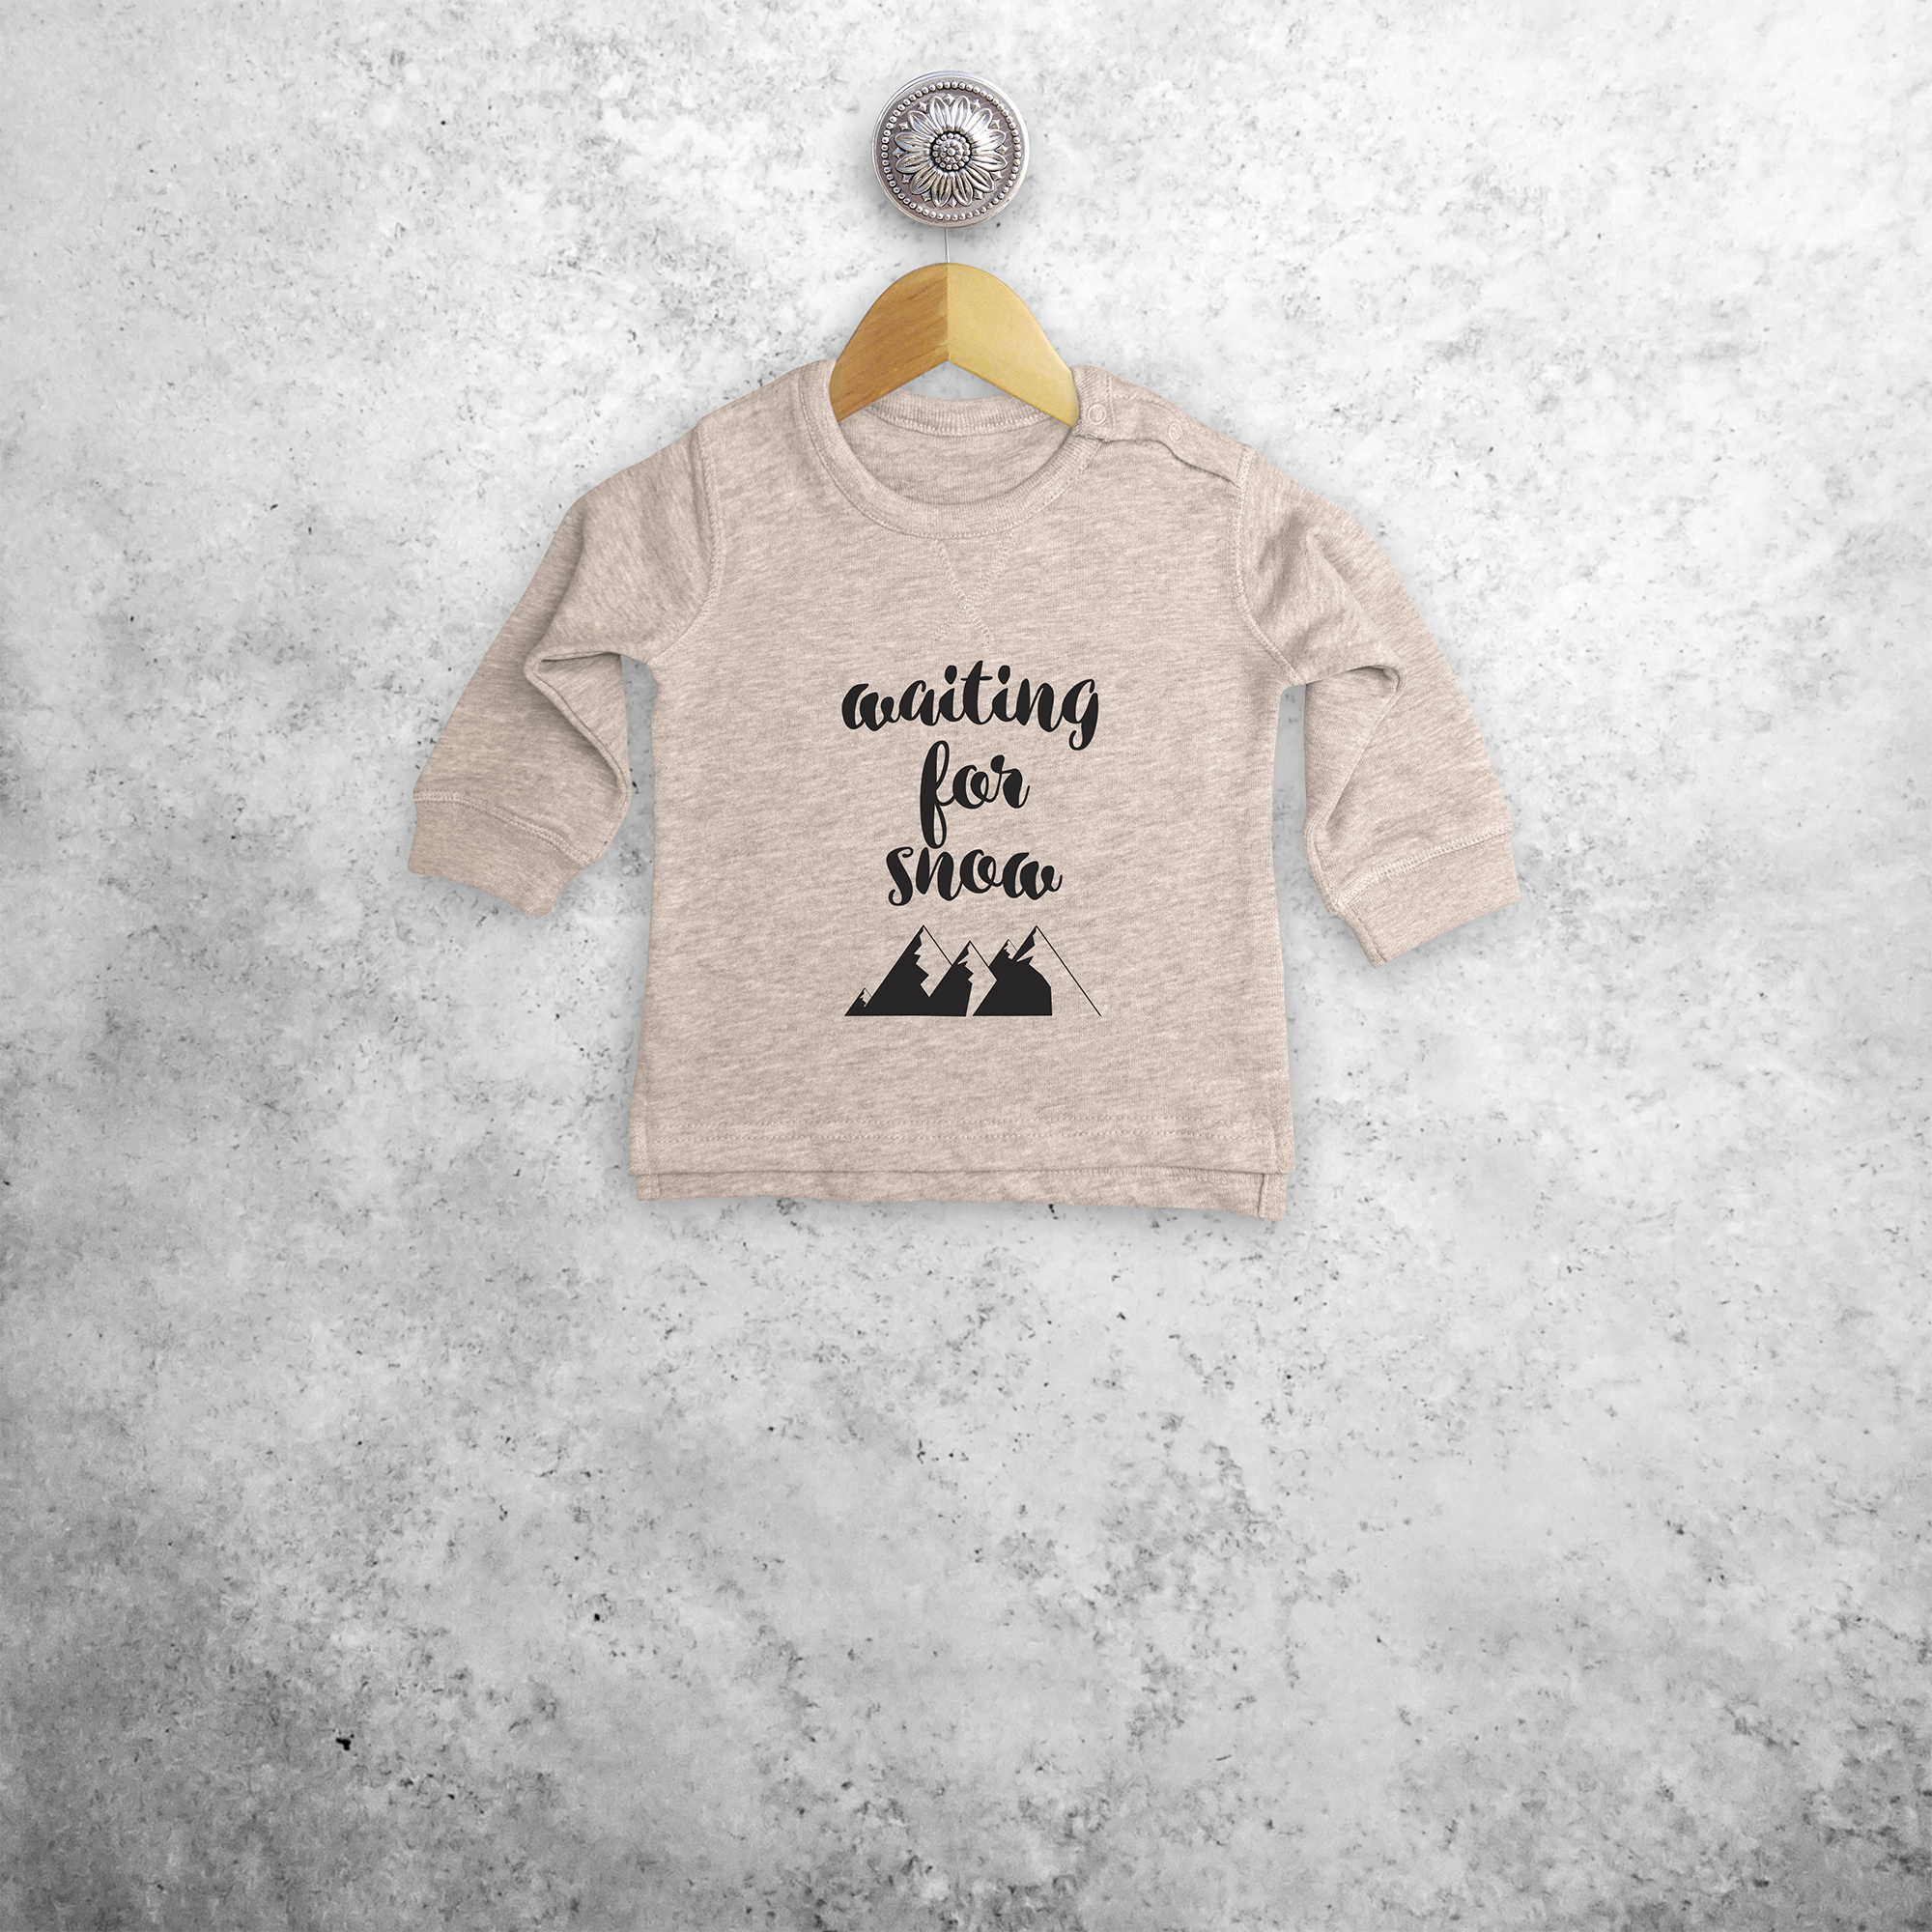 Baby or toddler sweater, with ‘Waiting for snow’ print by KMLeon.